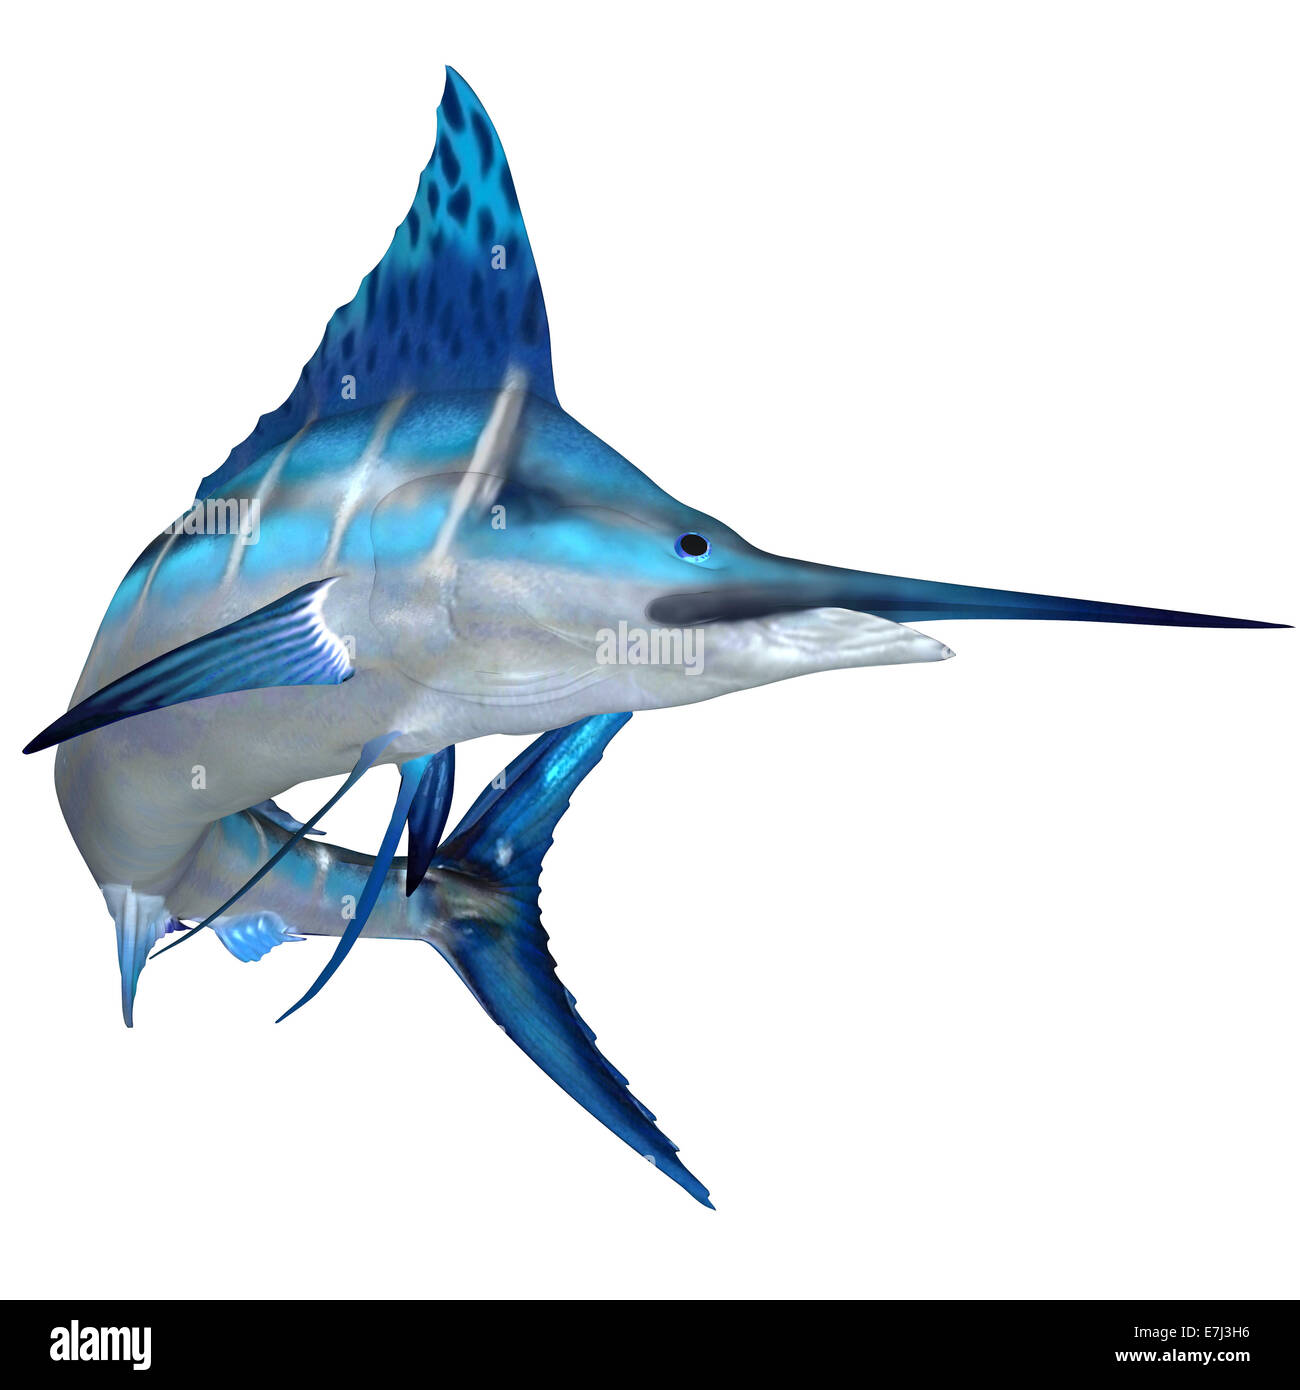 The Blue Marlin is a predator and a favorite game fish of deep sea anglers. Stock Photo